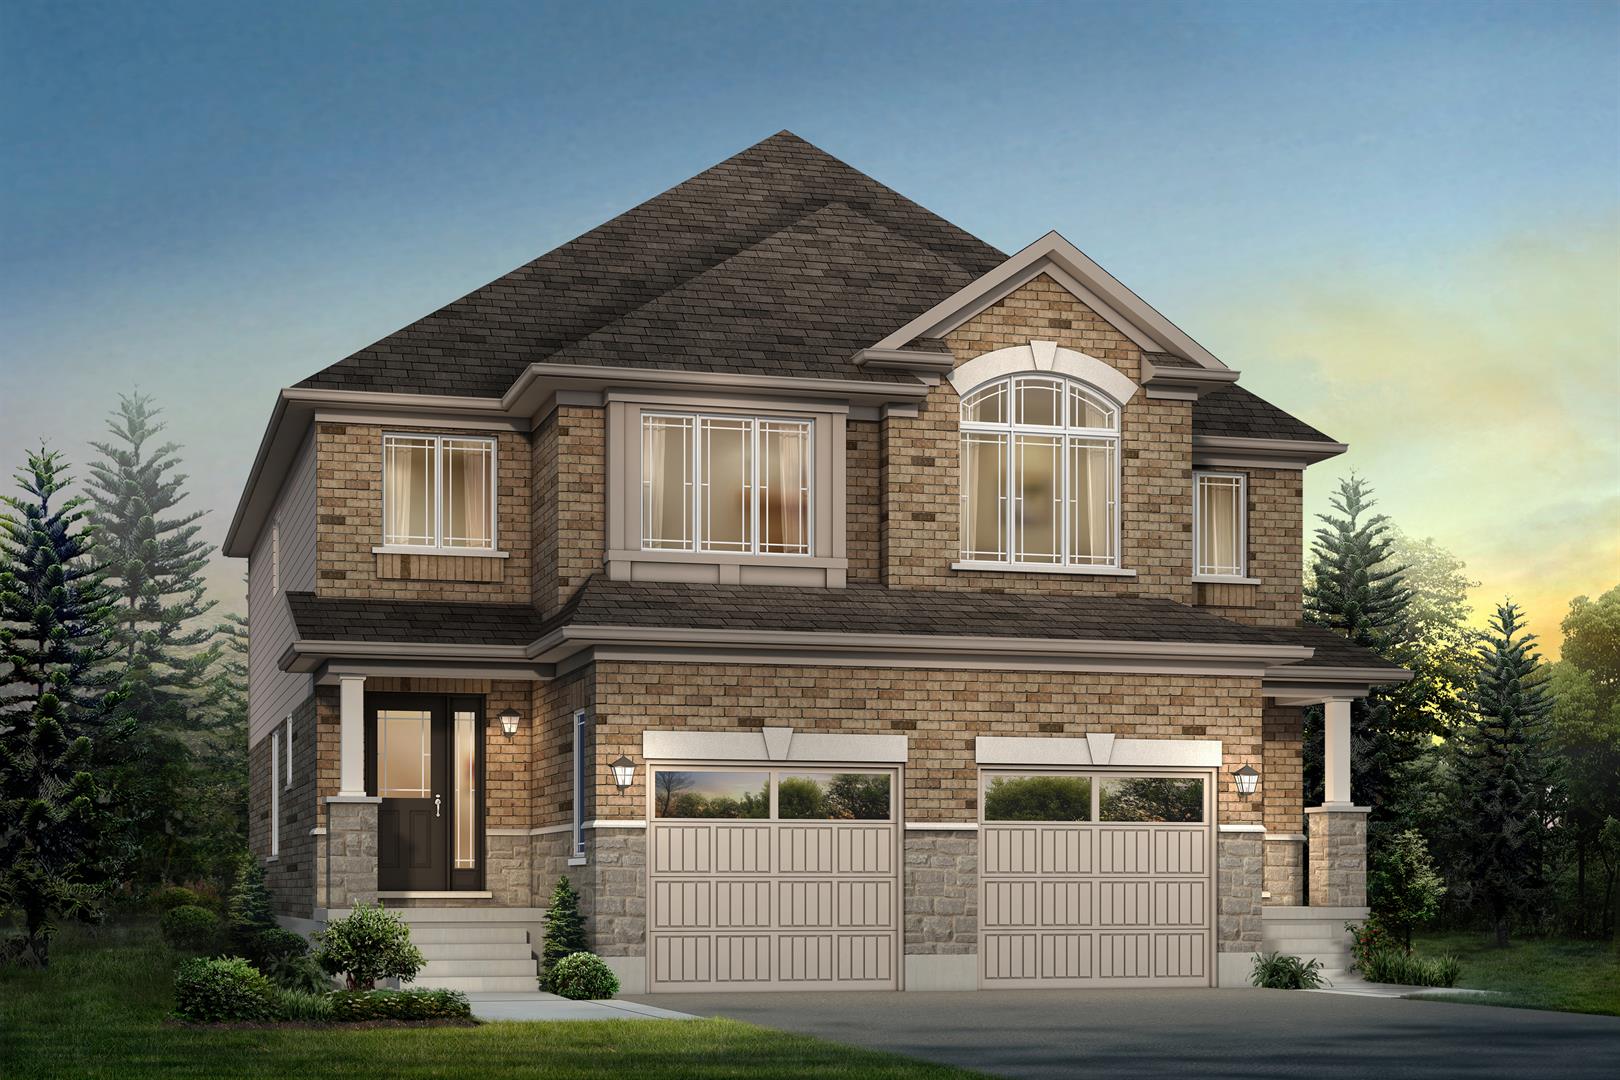 stouffville homes for sale